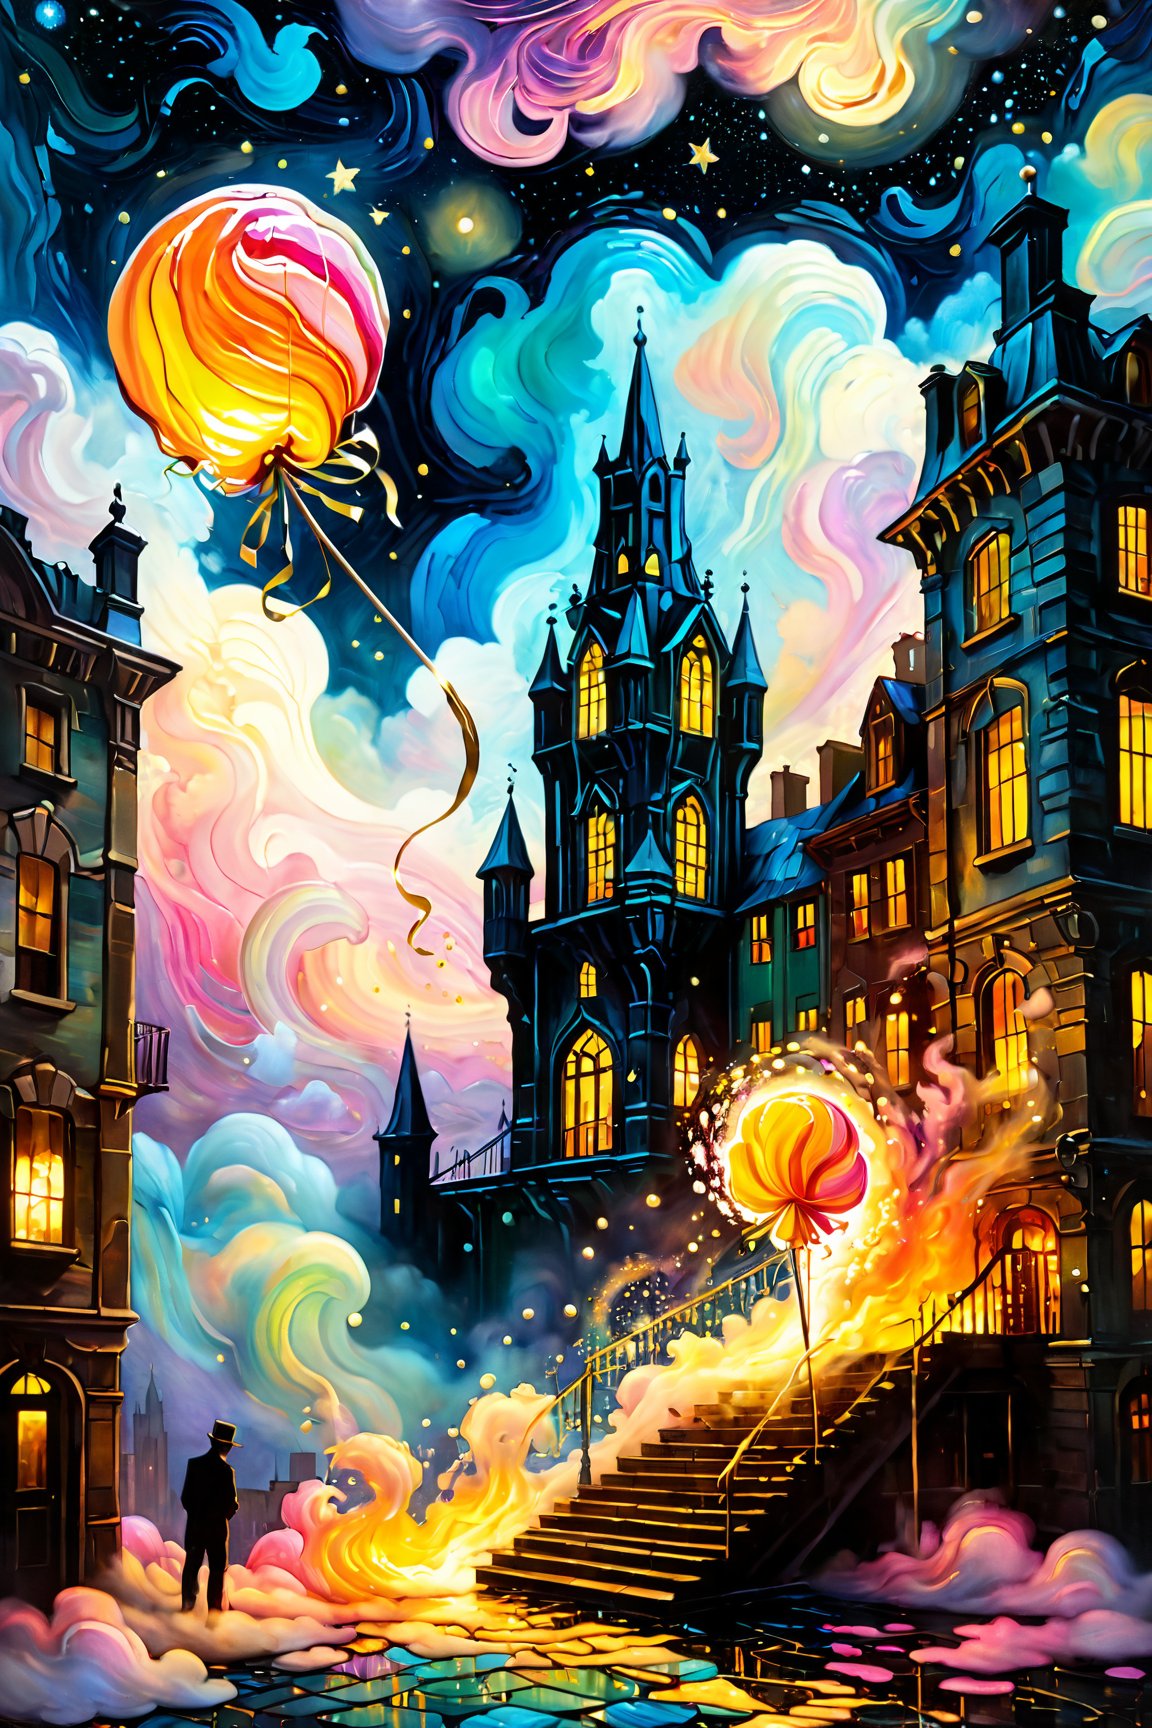 (masterpiece, best quality:1.4), fine art, oil painting, dark tales, "in a mystical metropolis at dusk, a 42 year old adept stands atop a wobbly pedestal amidst a whimsical cityscape, surrounded by swirling clouds of forgotten knowledge that have seeped into the atmosphere from an adjacent library. the skyscraper shaped jellybean tower looms in the background, its windows pulsating with an otherworldly glow as wispy creatures flit about the periphery. glowing tendrils of ink stream from the adept's fingers, entwining with rainbow hued licorice whips that twist and turn in impossible ways up the staircase. the air is filled with a sweet, edible gold dust that tastes like birthday cake, as if the sun has been replaced by a giant lollipop on fire, casting a warm glow over the scene." in the van gogh style, starry sky, dan mumford, andy kehoe, 2d, flat, delightful, vintage, art on a cracked paper, patchwork, stained glass, fairytale, storybook detailed illustration, cinematic, ultra highly detailed, tiny details, beautiful details, mystical, luminism, vibrant colors, complex background,v0ng44g,oil paint ,more detail XL